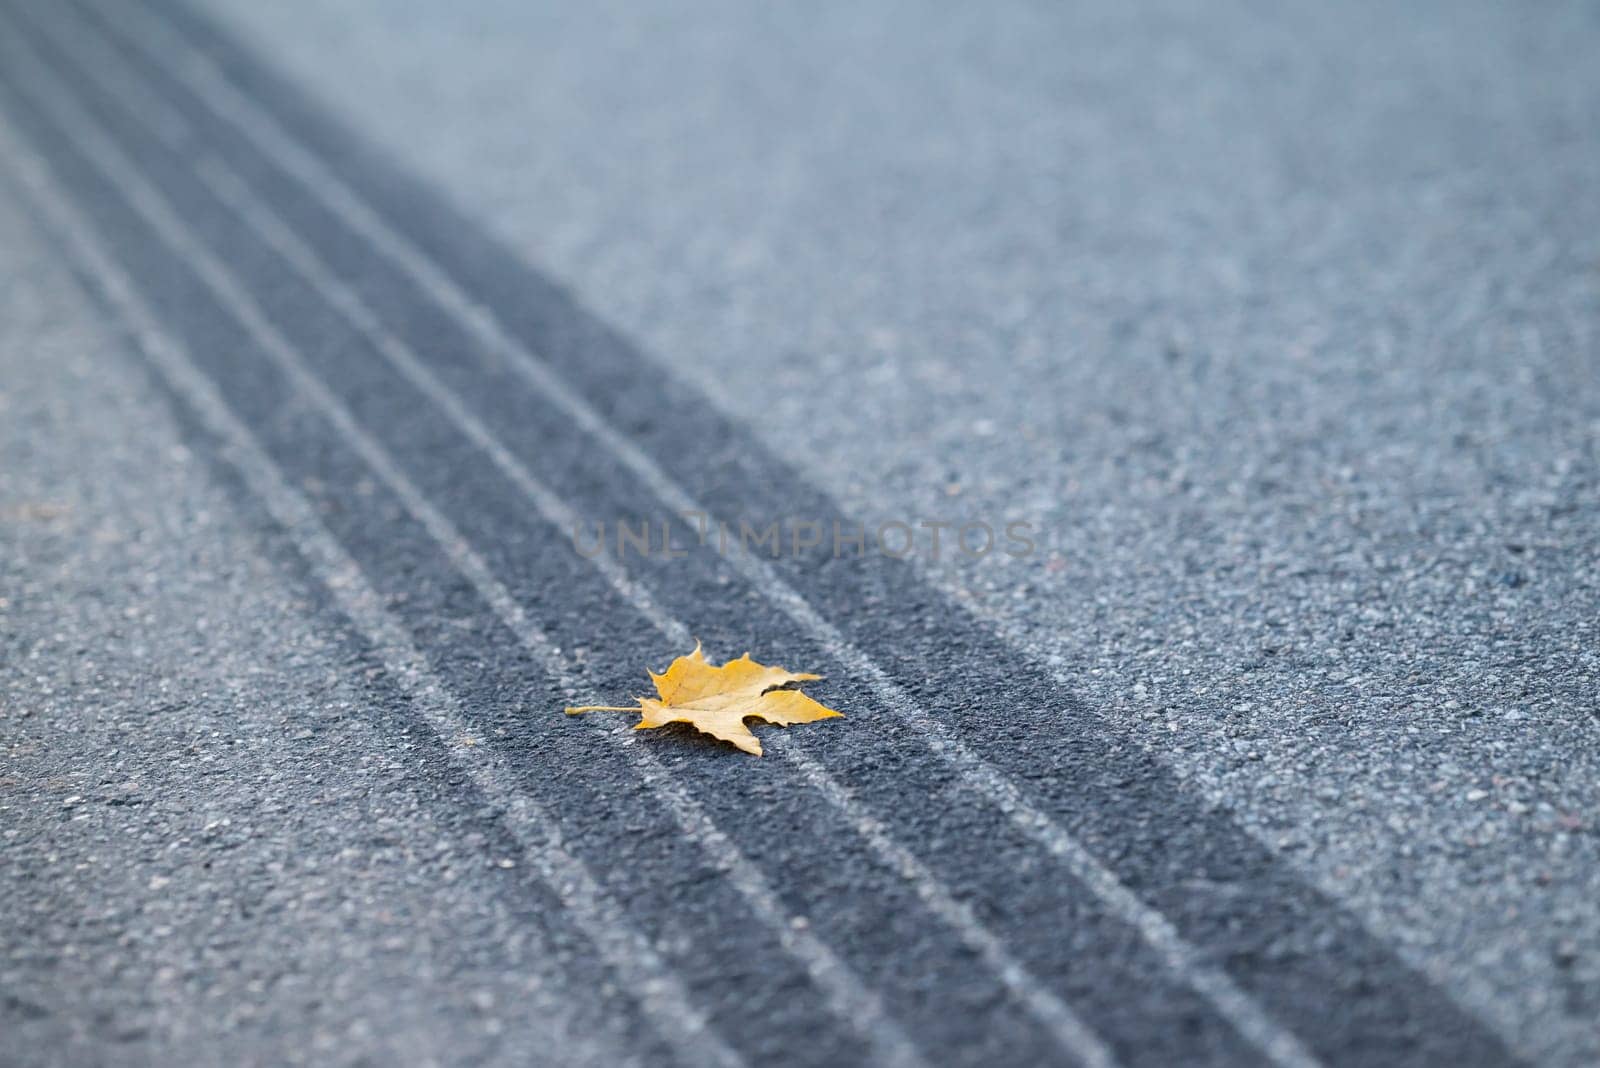 Symbol of often car accidents in autumn, because of bad weather and visibility on roads